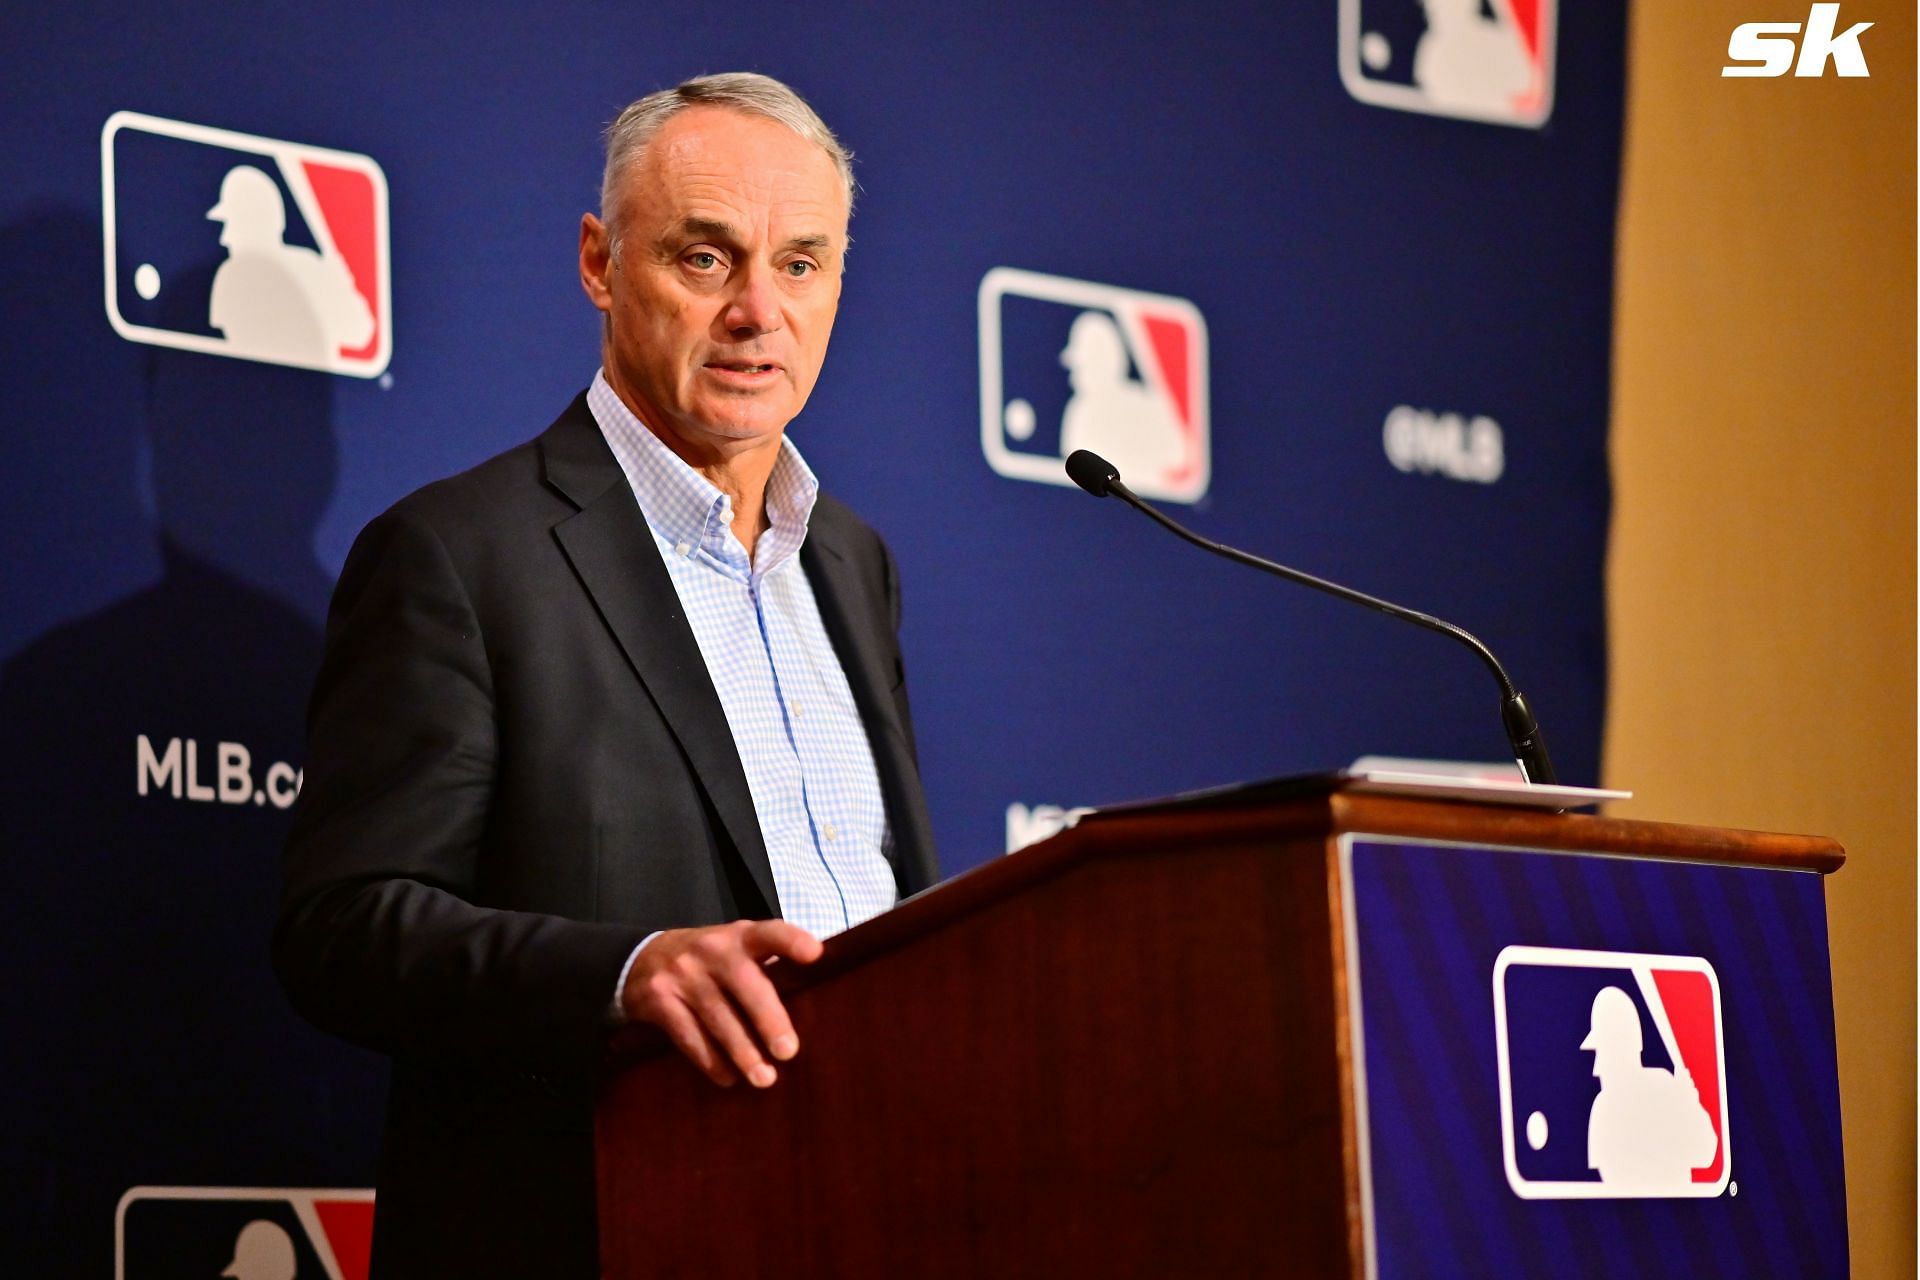 That time when Rob Manfred took a hard step against the Braves